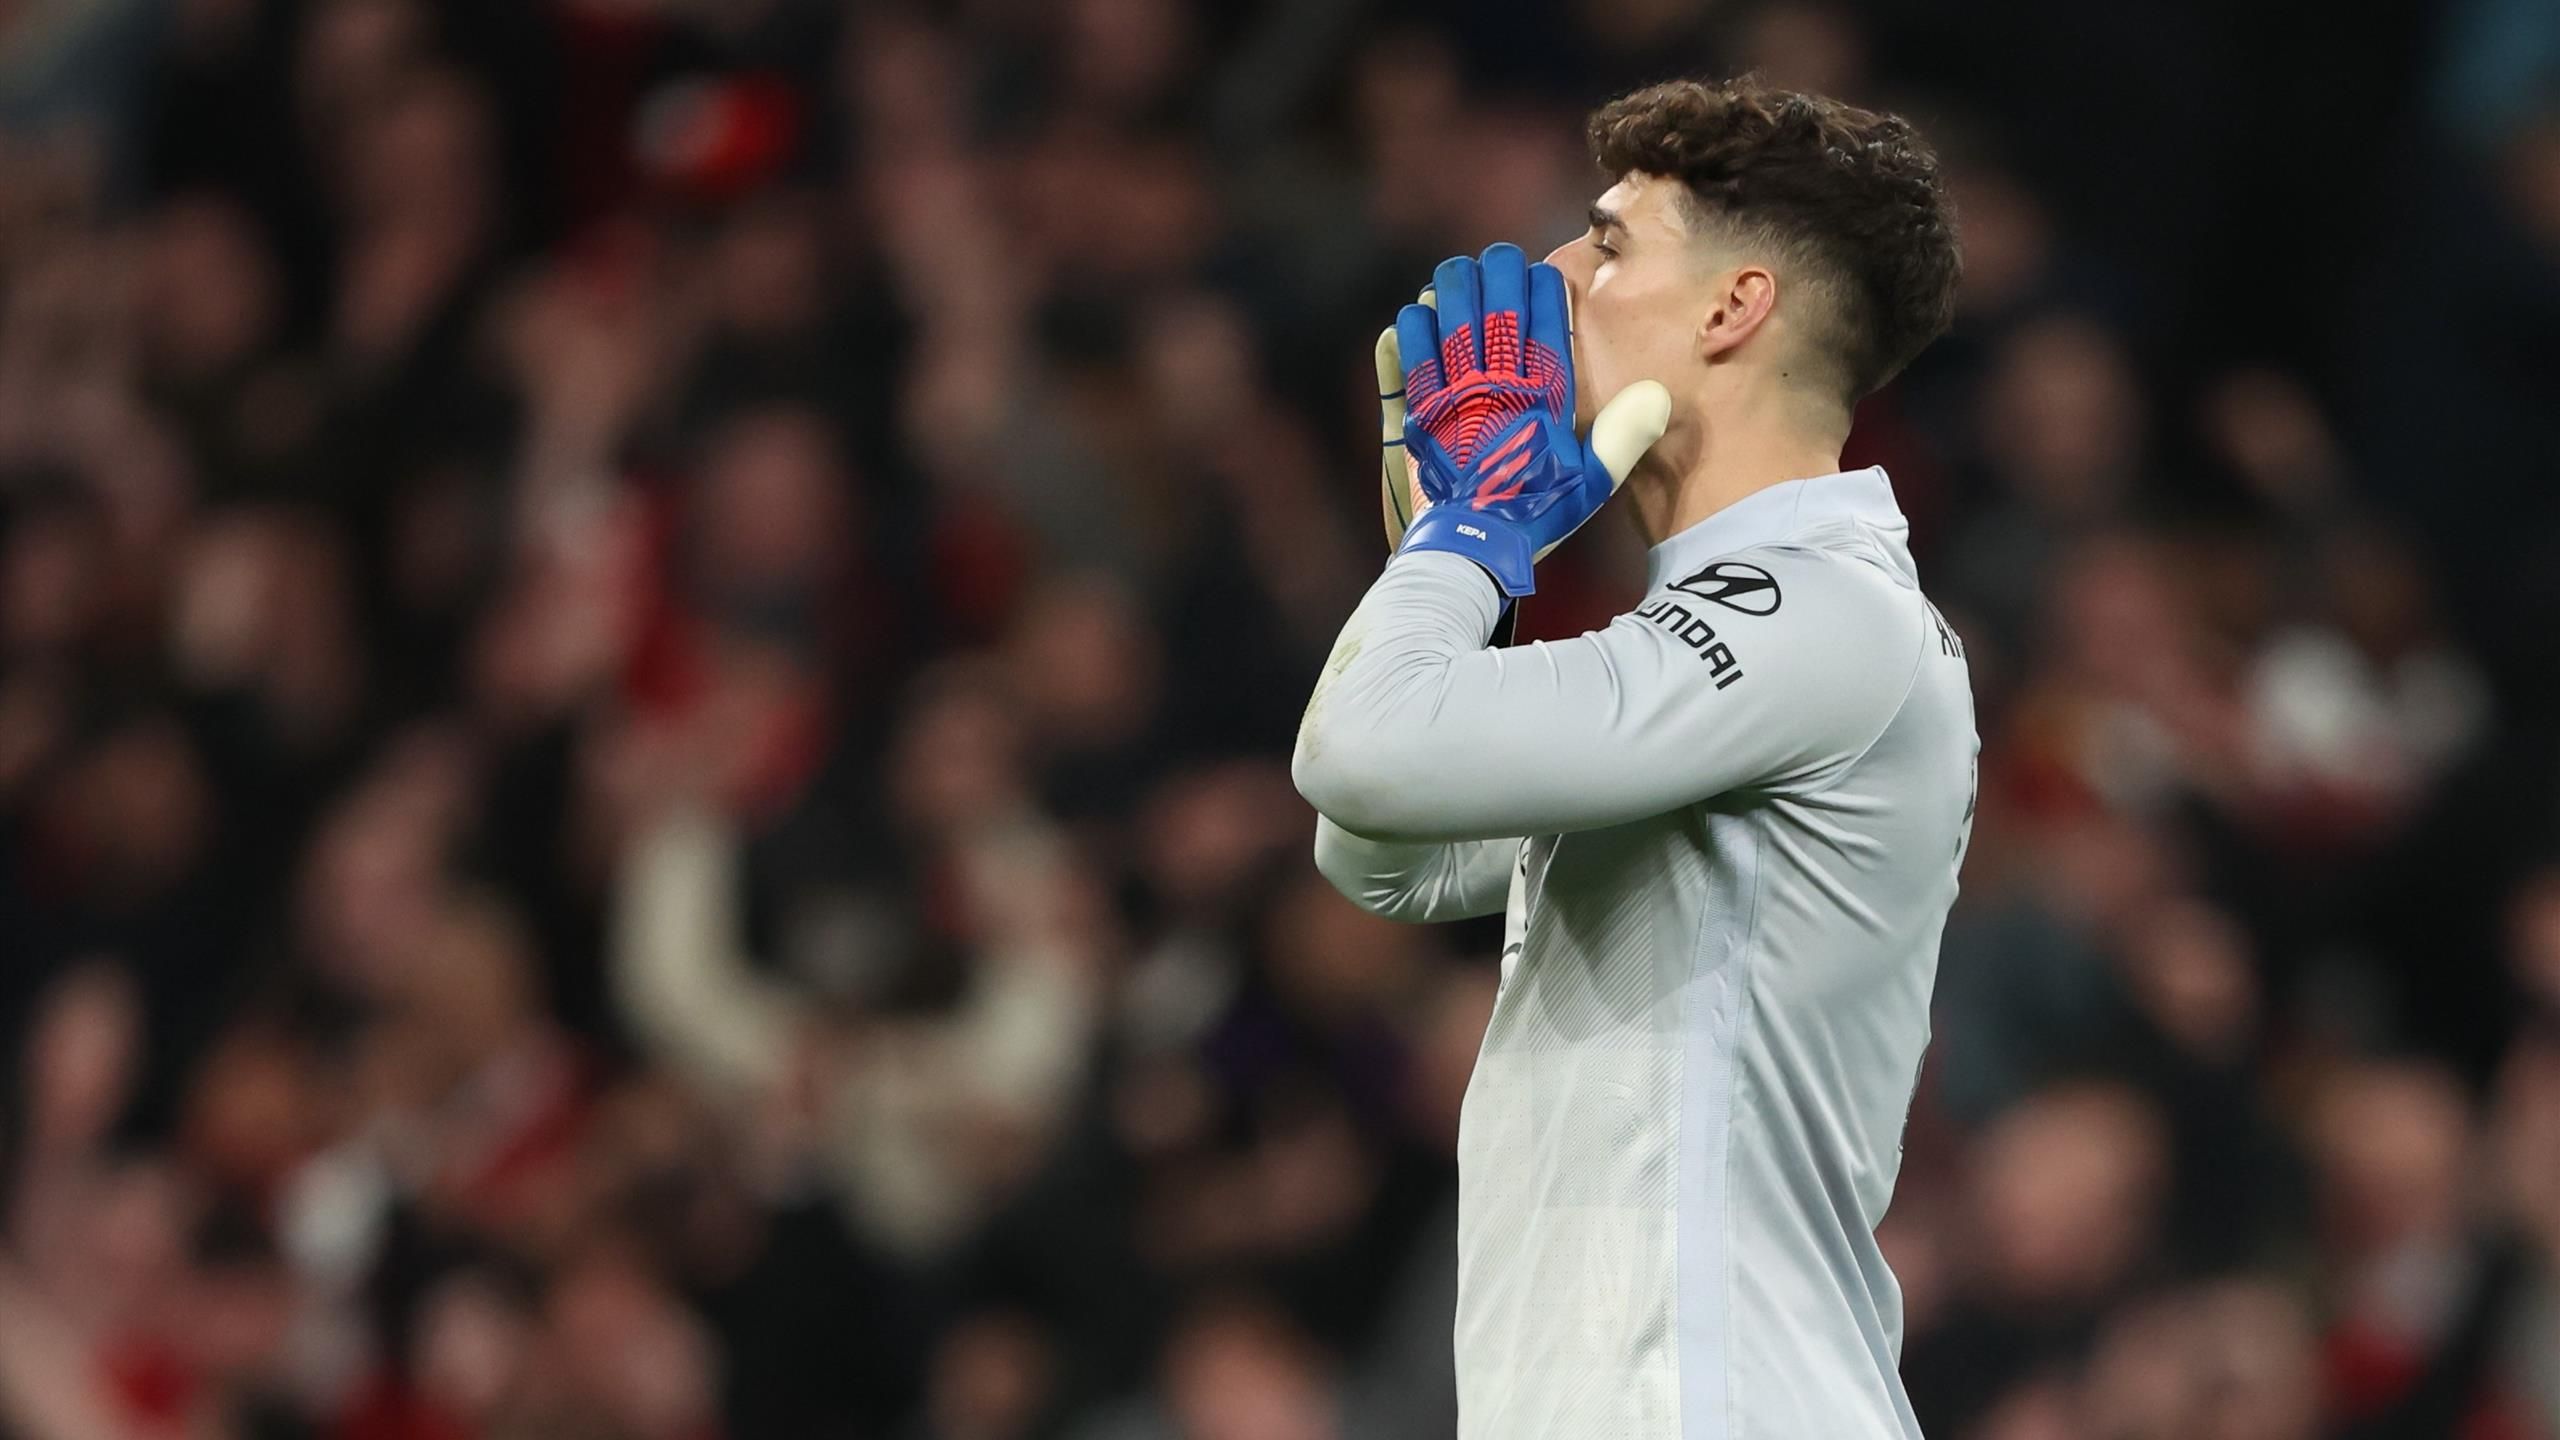 Liverpool could capitalise on Kepa's absence in the Chelsea goal.